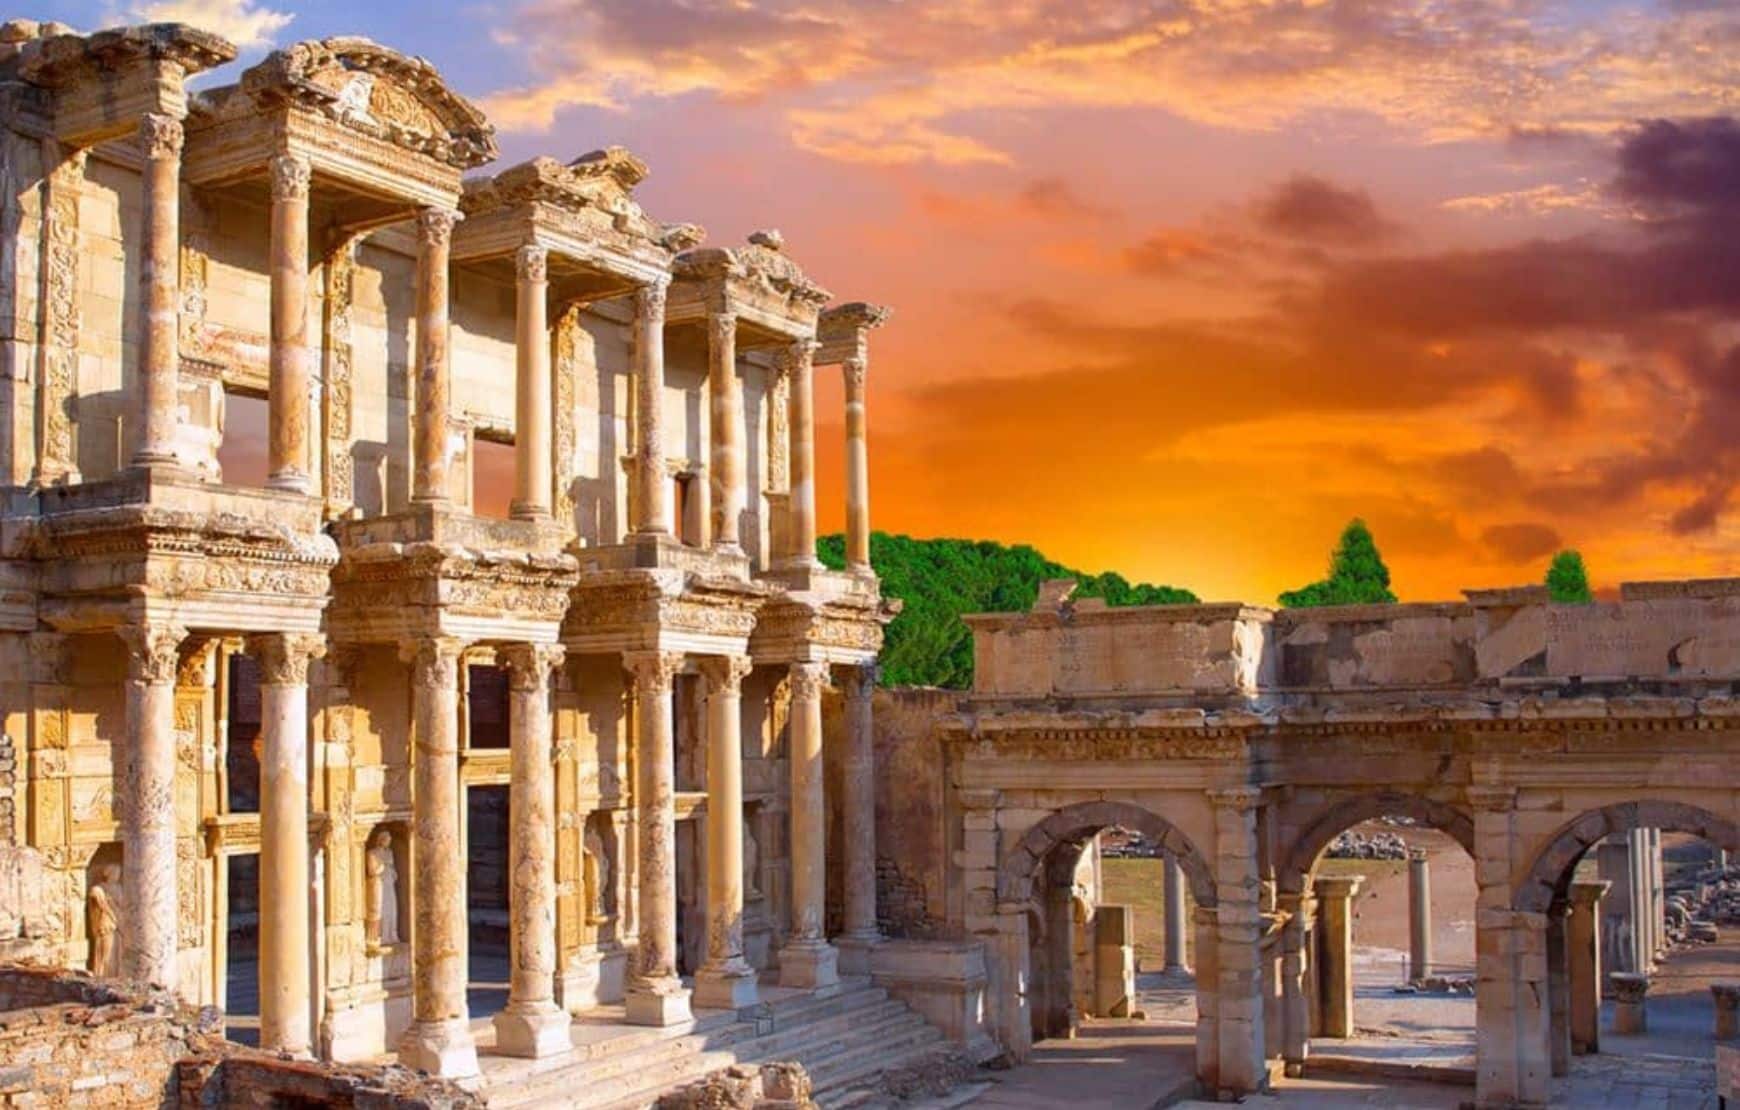 Celsus Library in Ephesus Ancient City